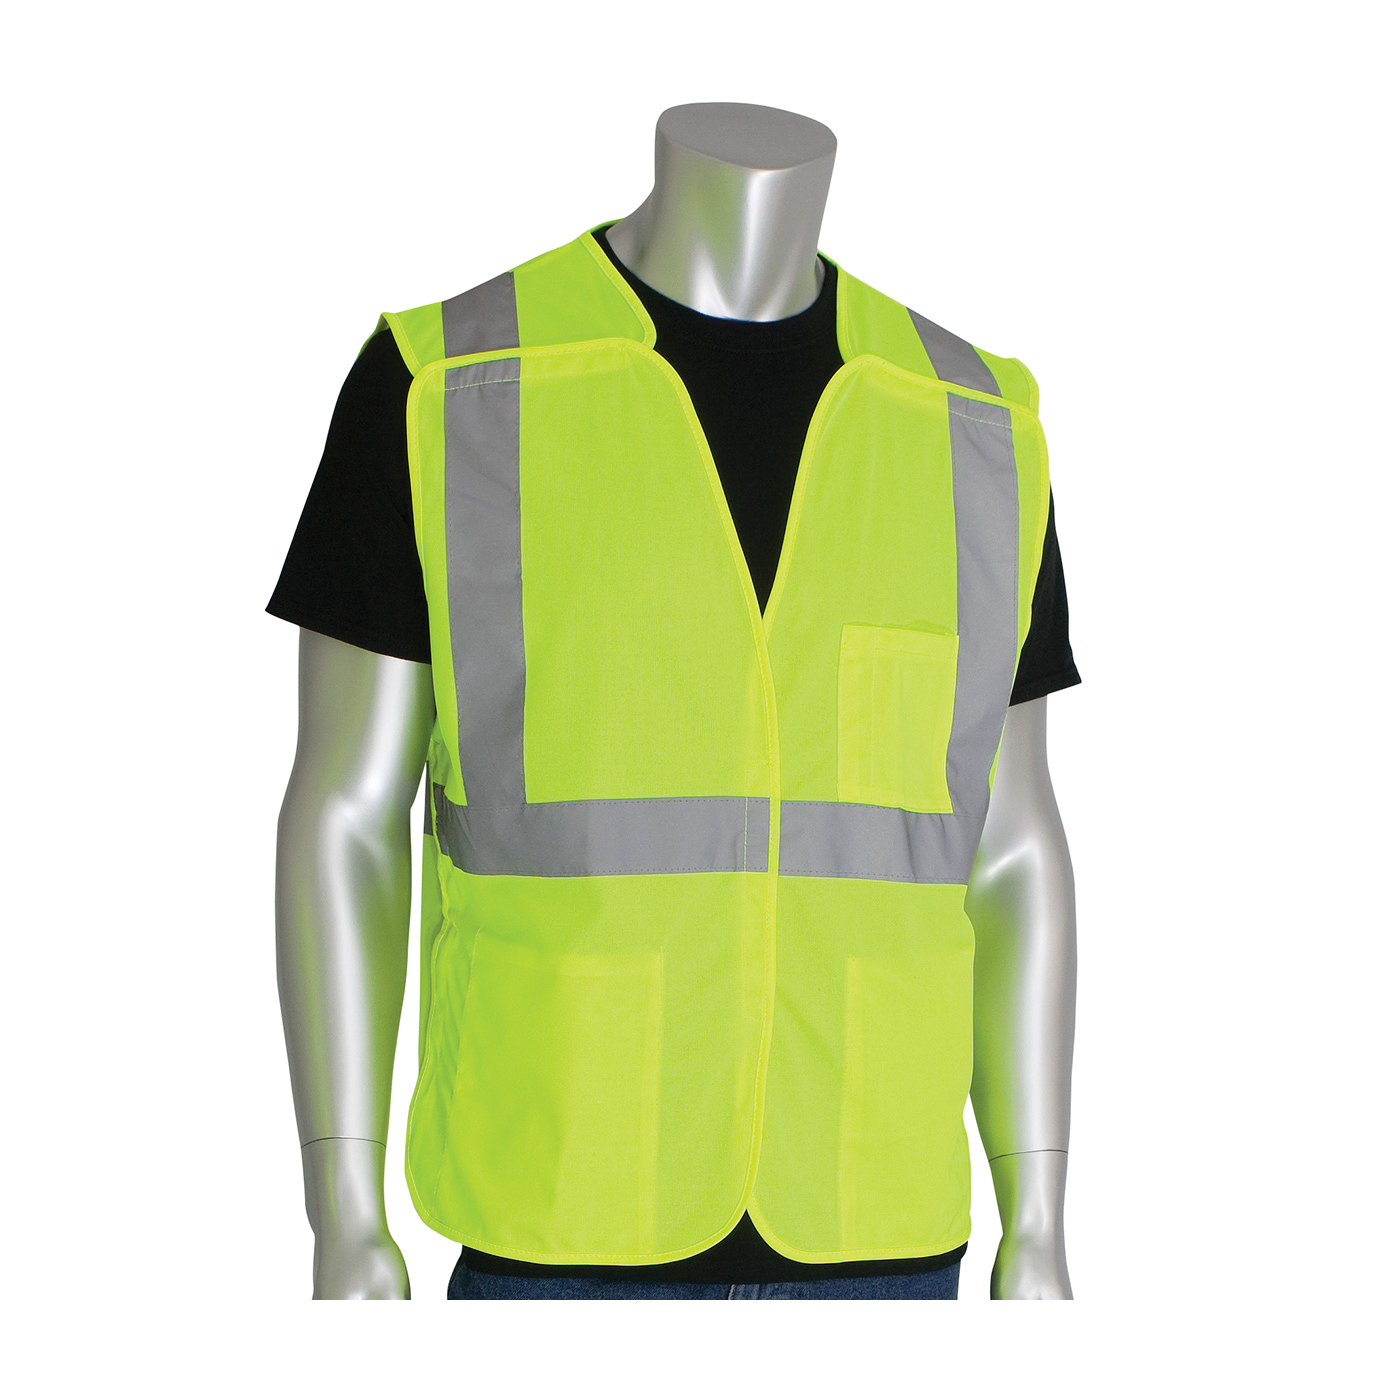 PIP® 302-5PVLY-S Safety Vest, S, Hi-Viz Lime Yellow, Polyester, Hook and Loop Closure, 3 Pockets, ANSI Class: Class 2, Specifications Met: ANSI 107 Type R